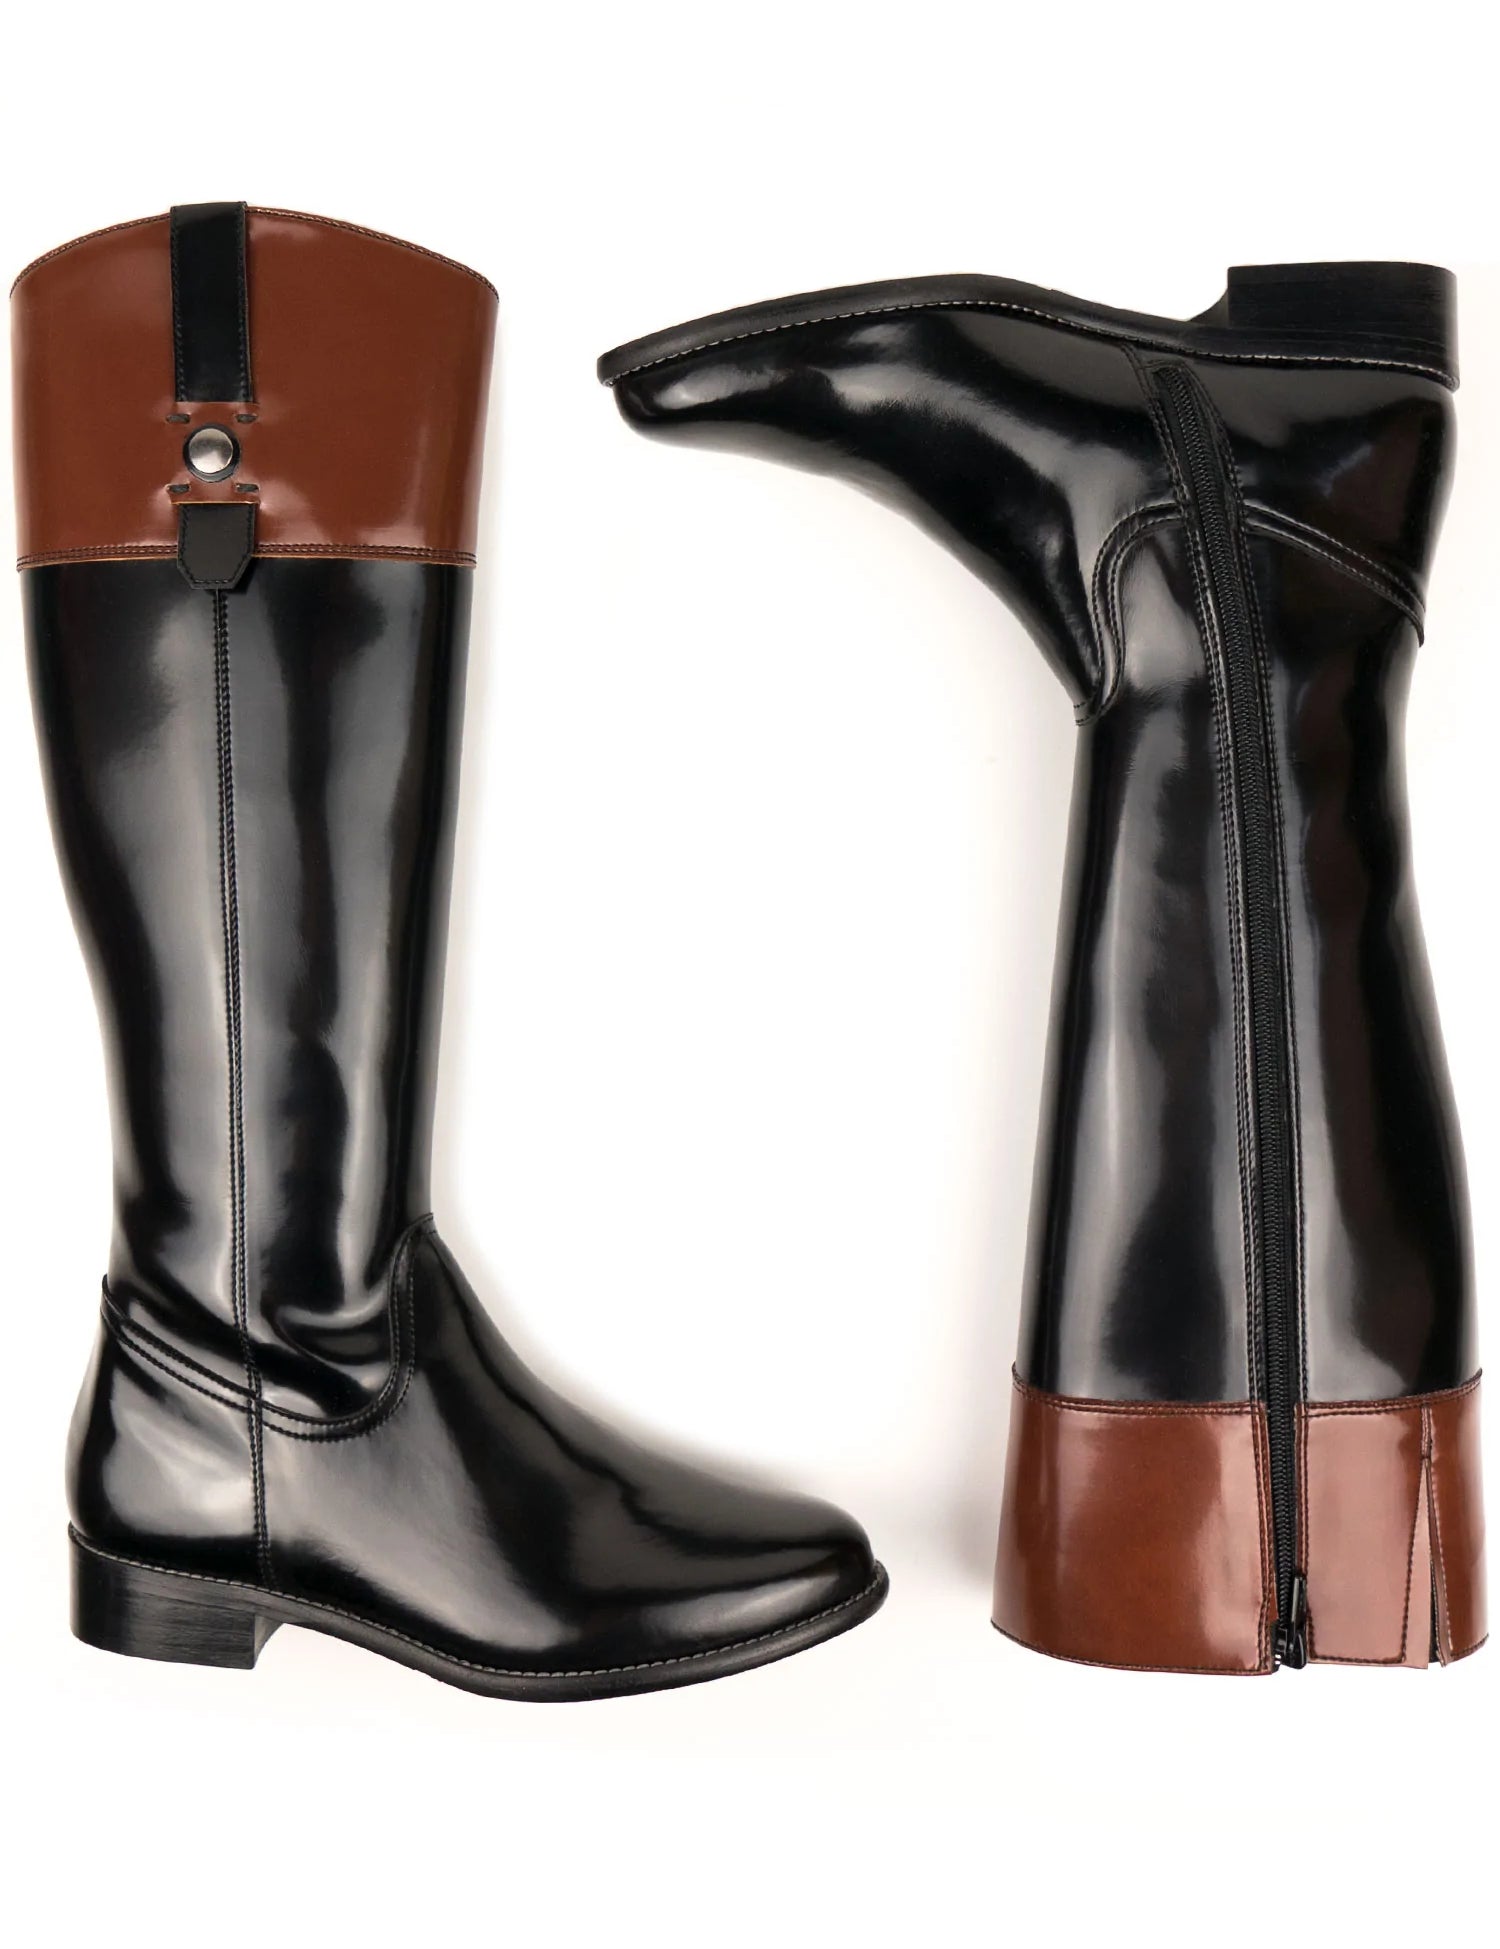 Phototemplate.psd_0234_riding-boots-1-new.webp